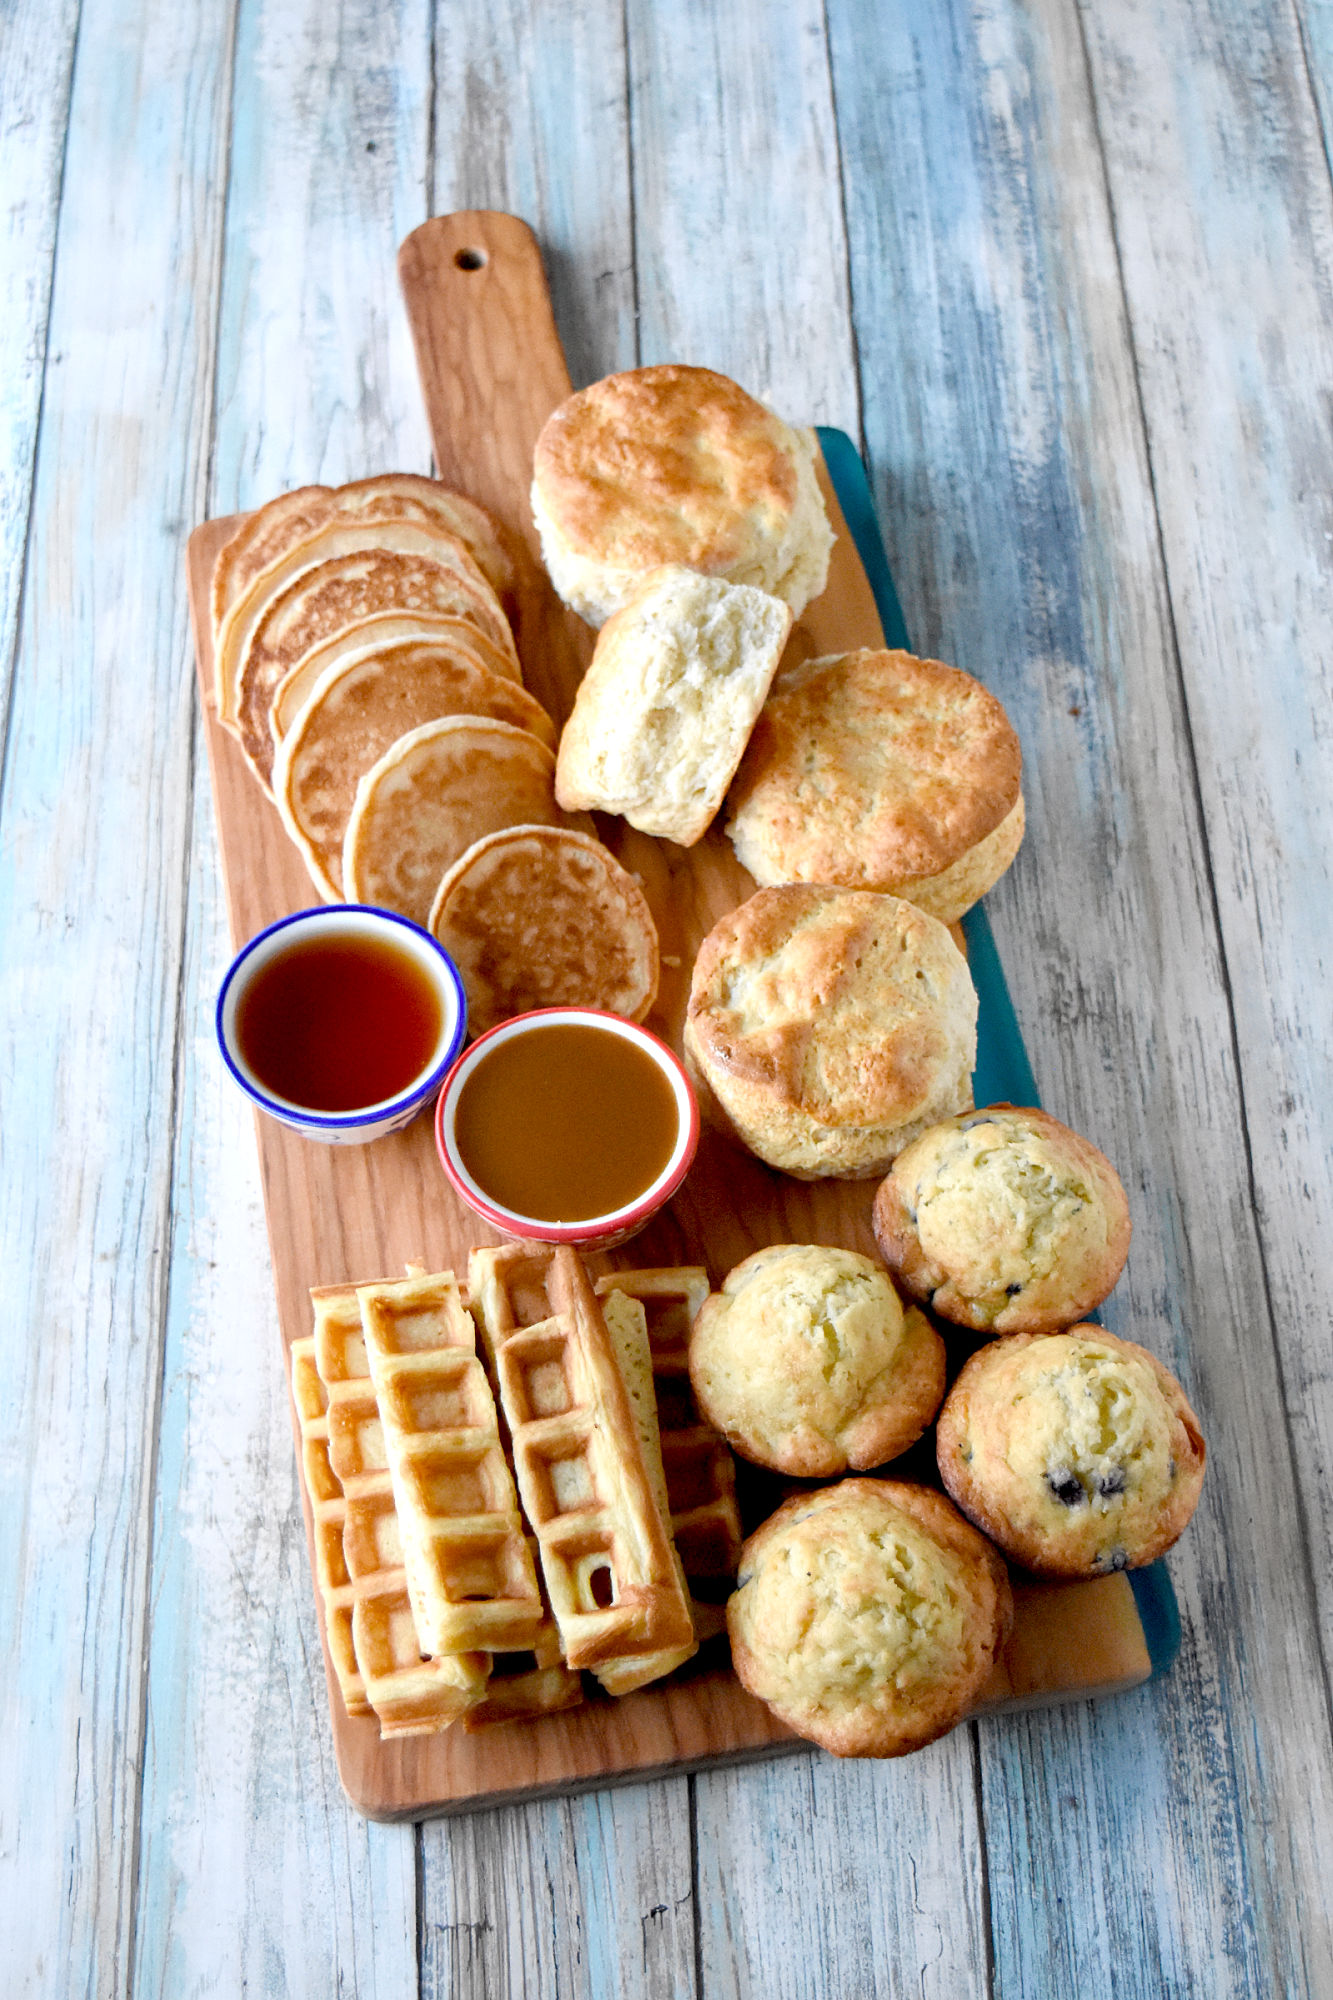 Easy Breakfast Board is simple and has all the family favorites on there. Using a pancake mix for both the pancakes and the waffles is an added bonus! #OurFamilyTable #breakfastboard #pancakes #waffles #fluffybiscuits